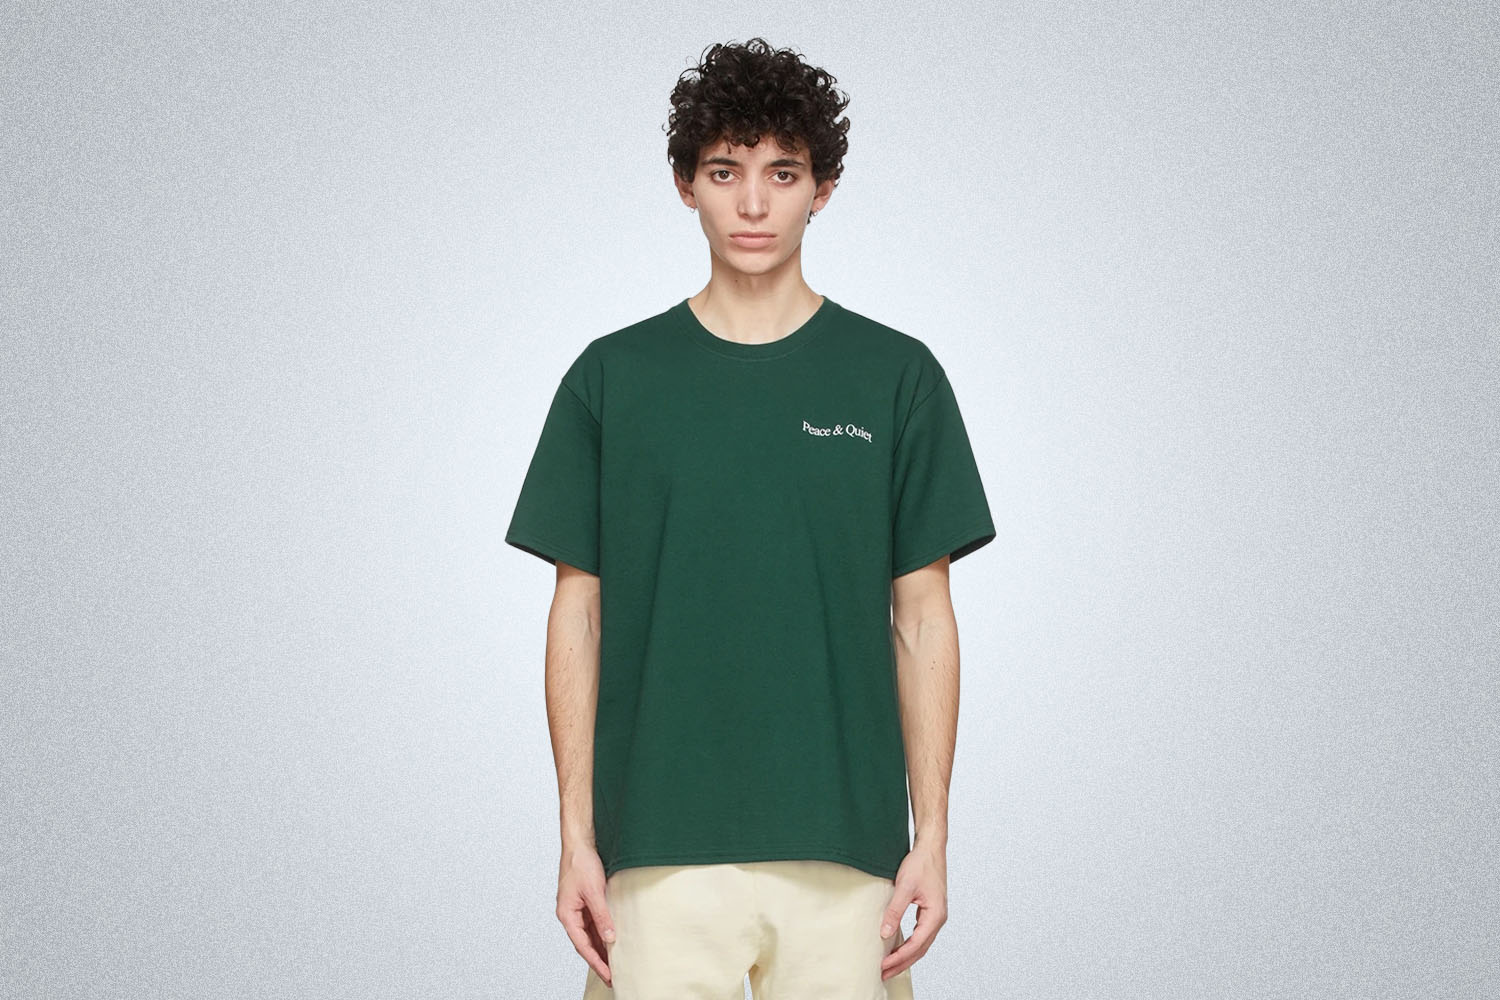 A model in a green MOPAQ tee on a grey background 